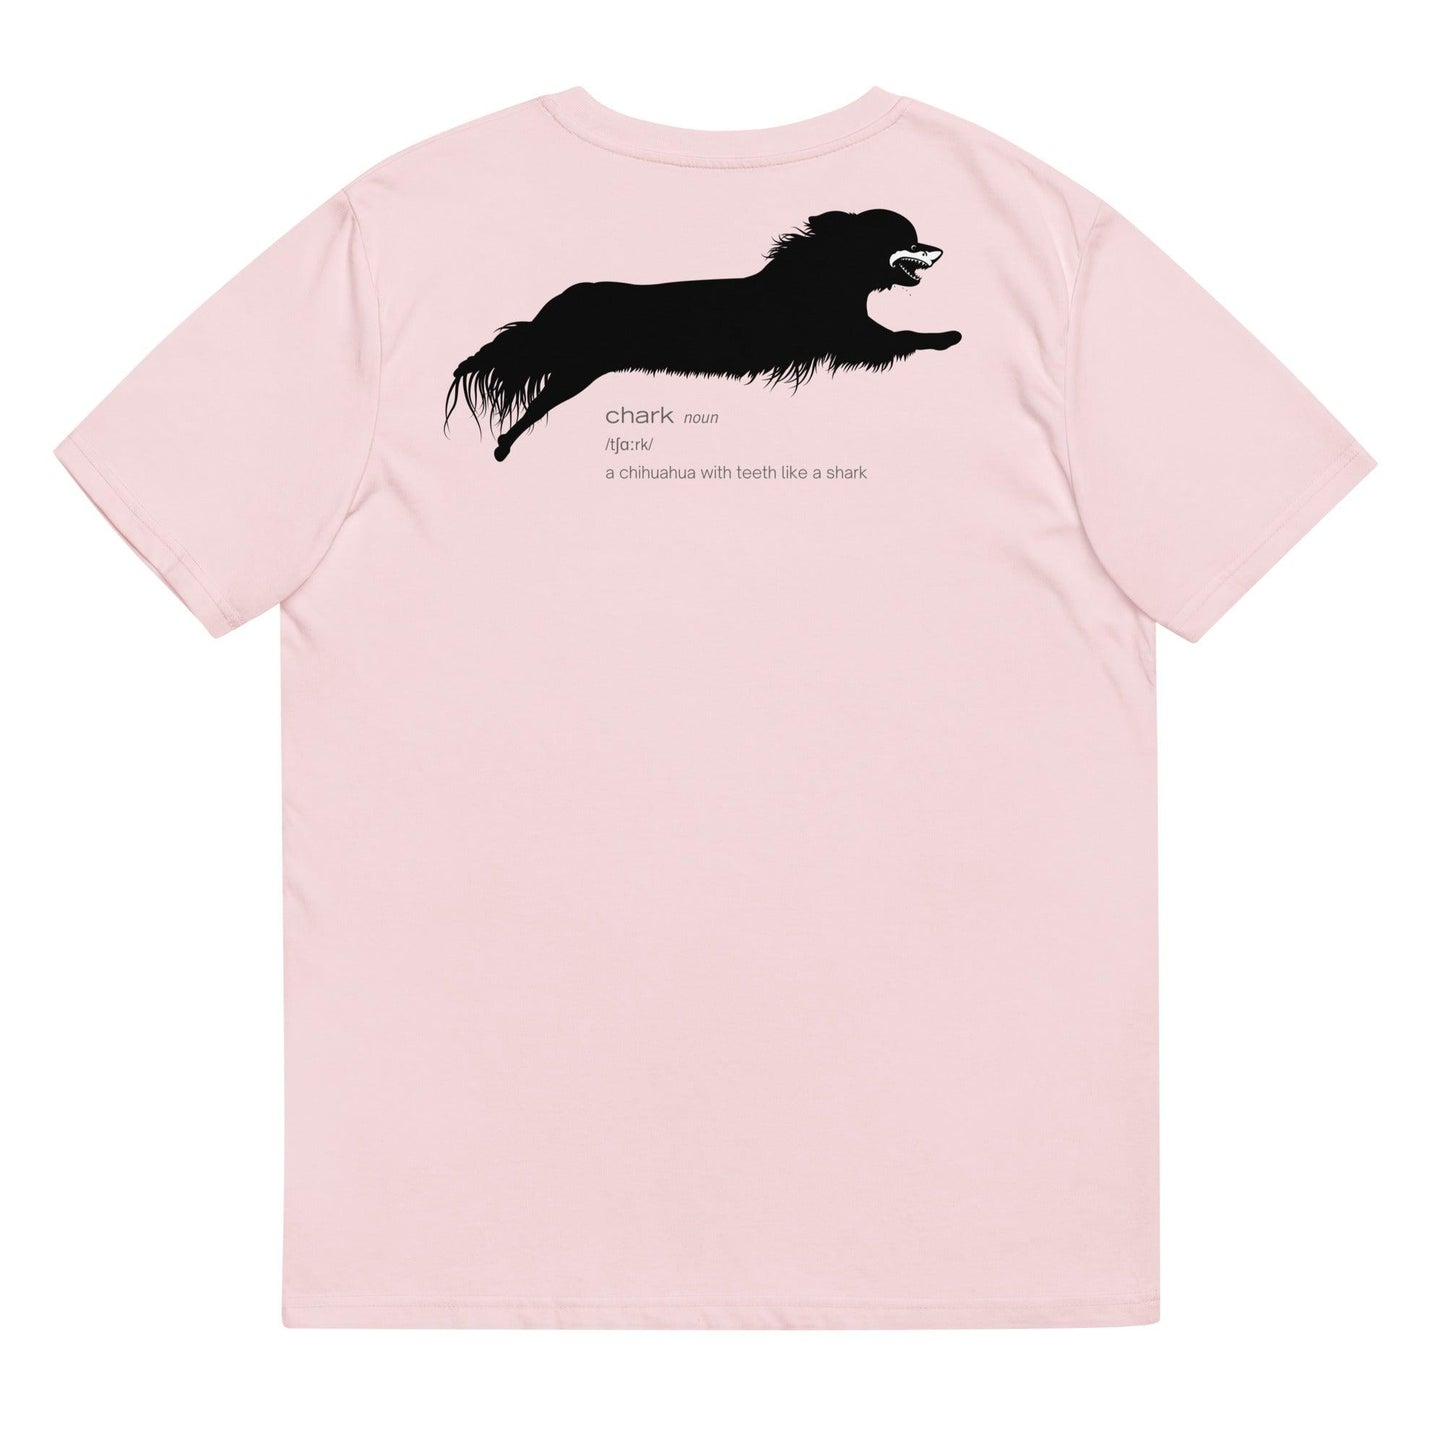 Chihuahua + Shark = Chark unisex t-shirt. Front: black silhouette of a longhaired chihuahua with the face of a great white shark + "Chark"  in cursive font. Back: another shark-faced chihuahua silhouette running across the shoulder blades + dictionary entry of the noun "chark": a chihuahua with teeth like a shark. 100% pure organic cotton. Light Pink. Unisex in sizes for men and women. Design by Renate Kriegler, owner of Chimigos - for the love of chihuahuas. More on chimigos.com